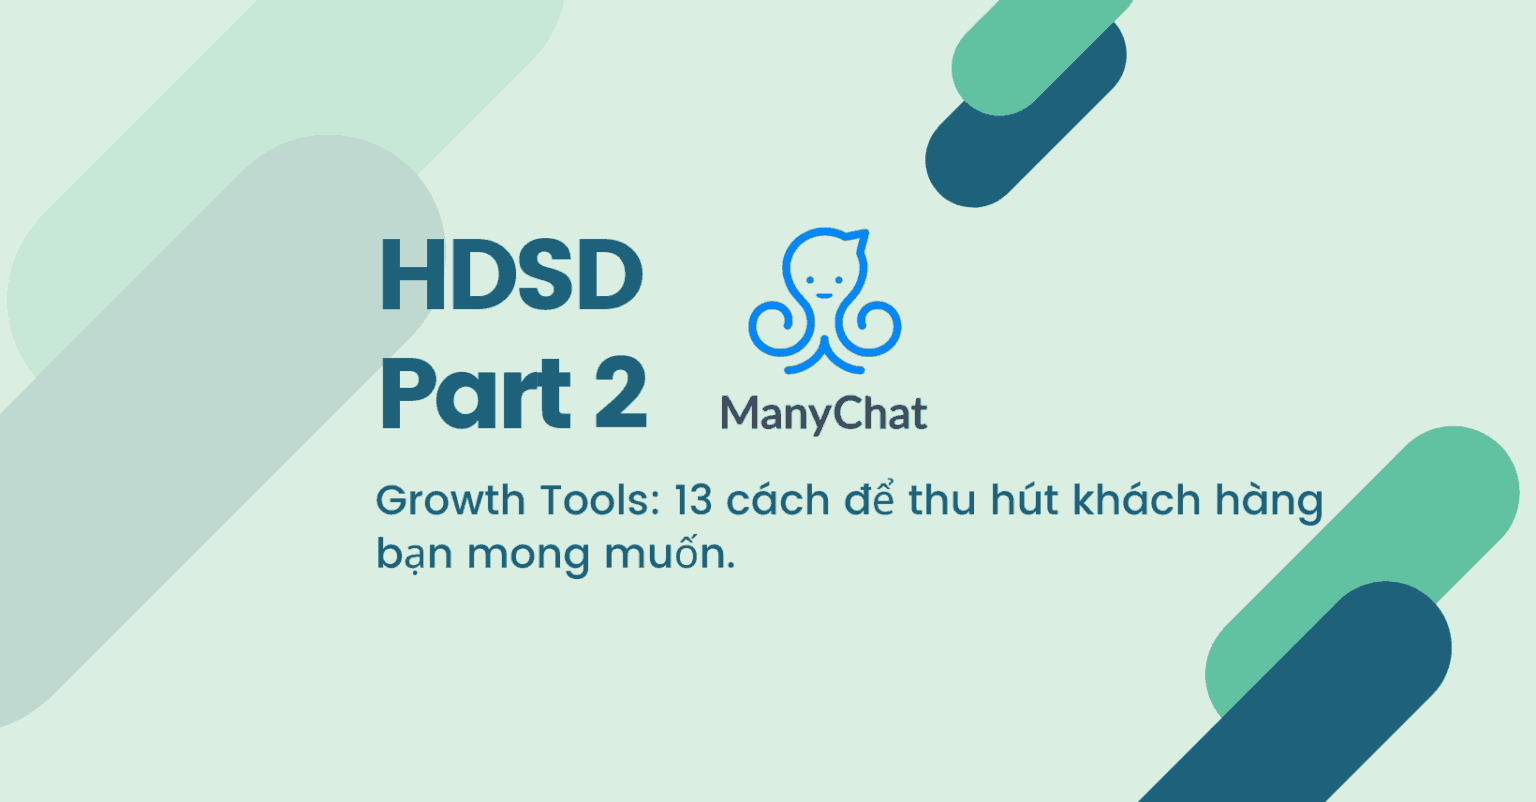 HDSD ManyChat part 2: Growth Tools